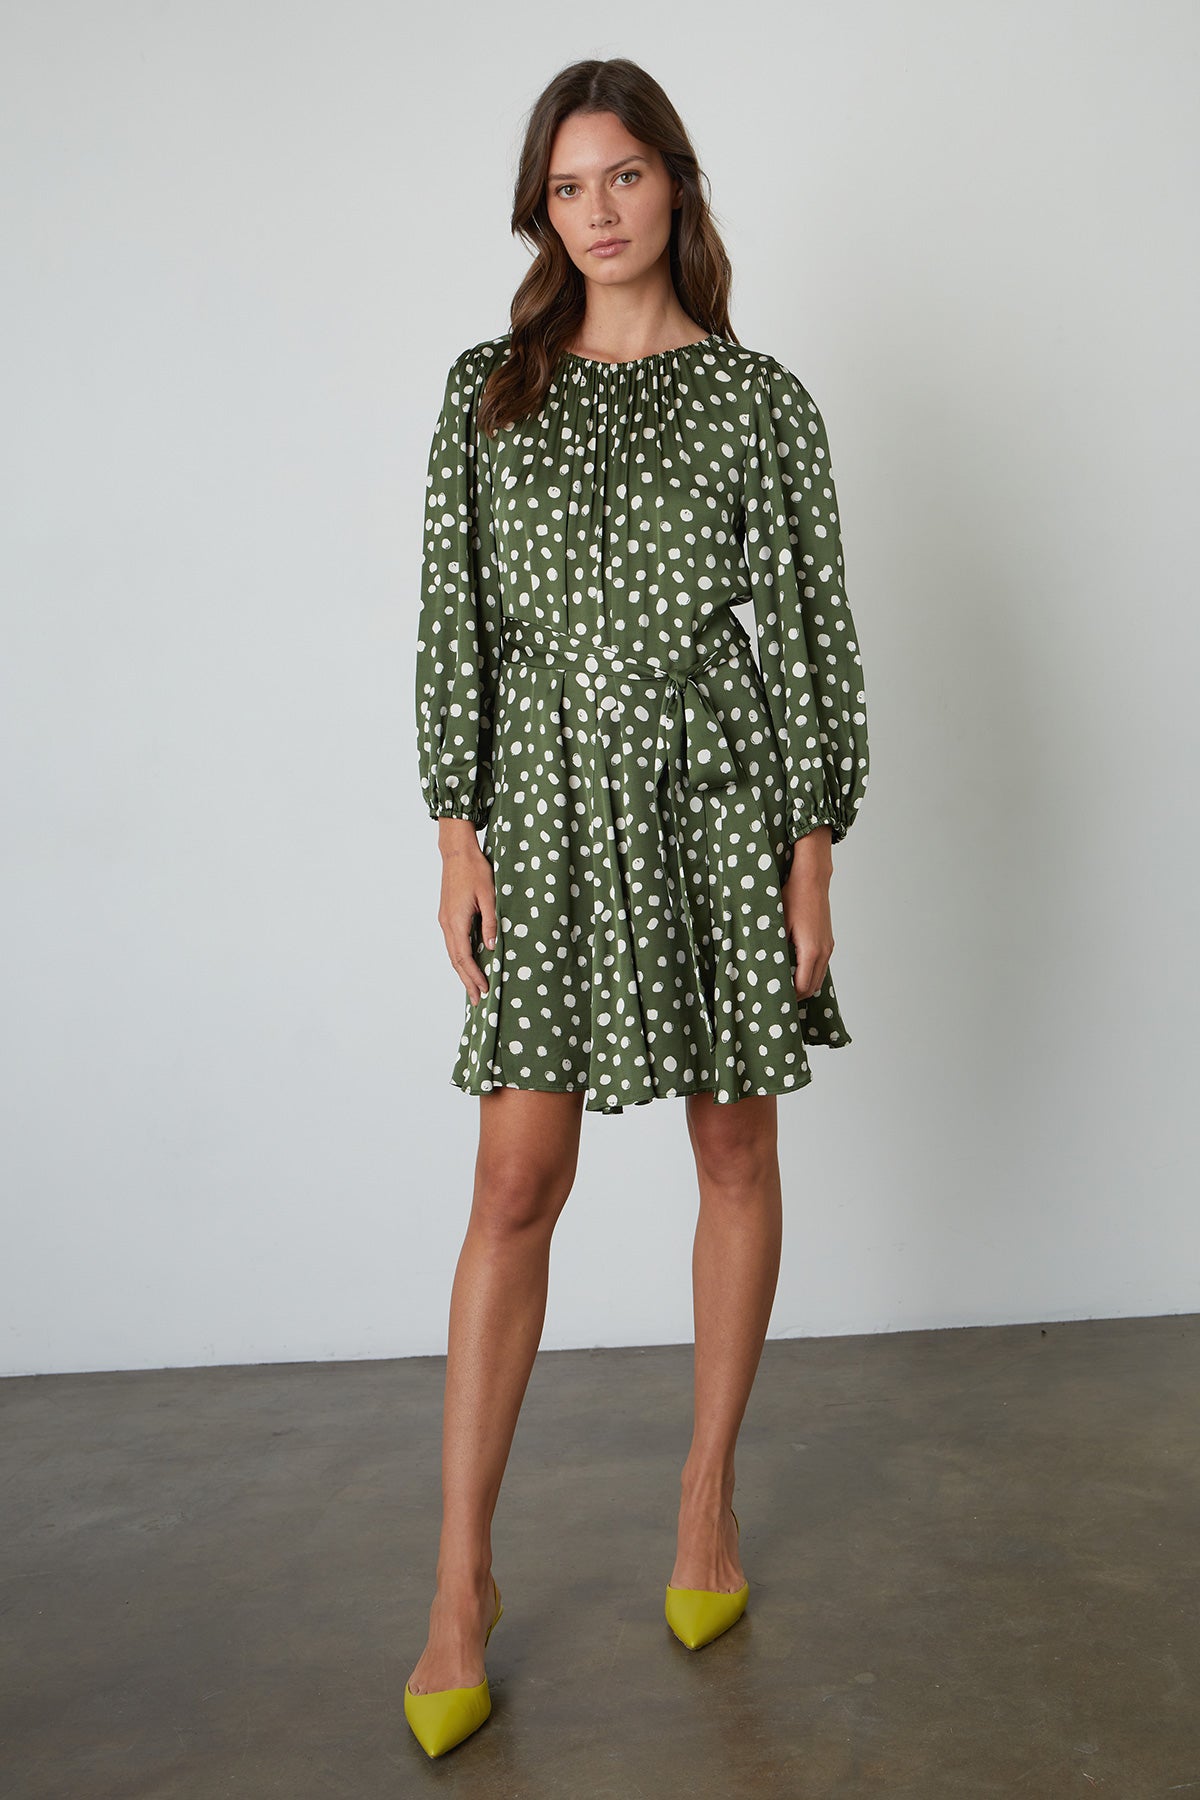 Kenia Polka Dot Dress with Green Background and Cream Dots Tied at Waist with heels full length view front-25078342090945